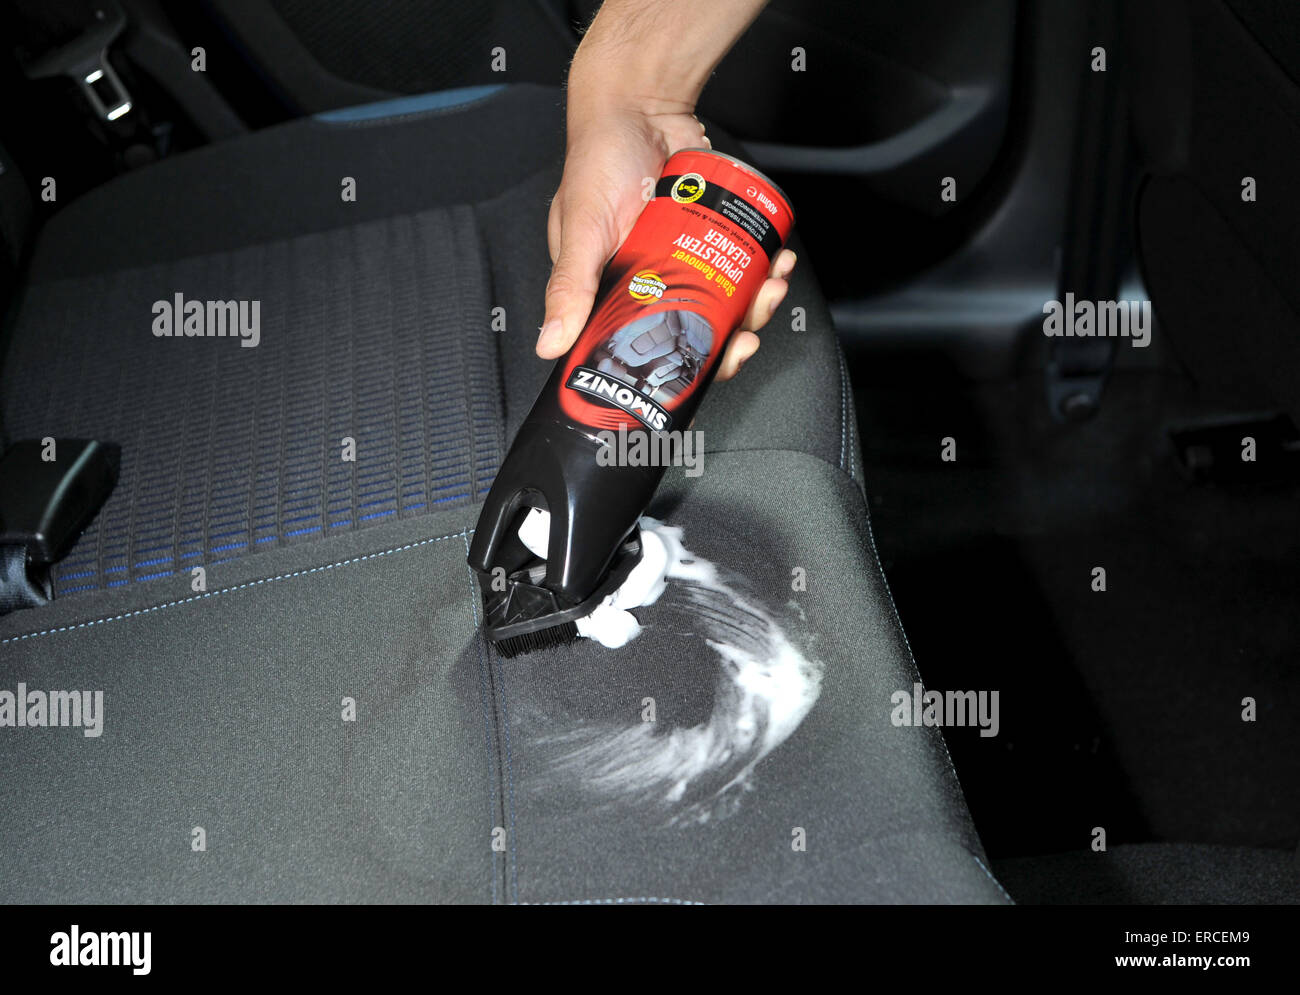 Cleaning Car Interior Stockfotos Cleaning Car Interior